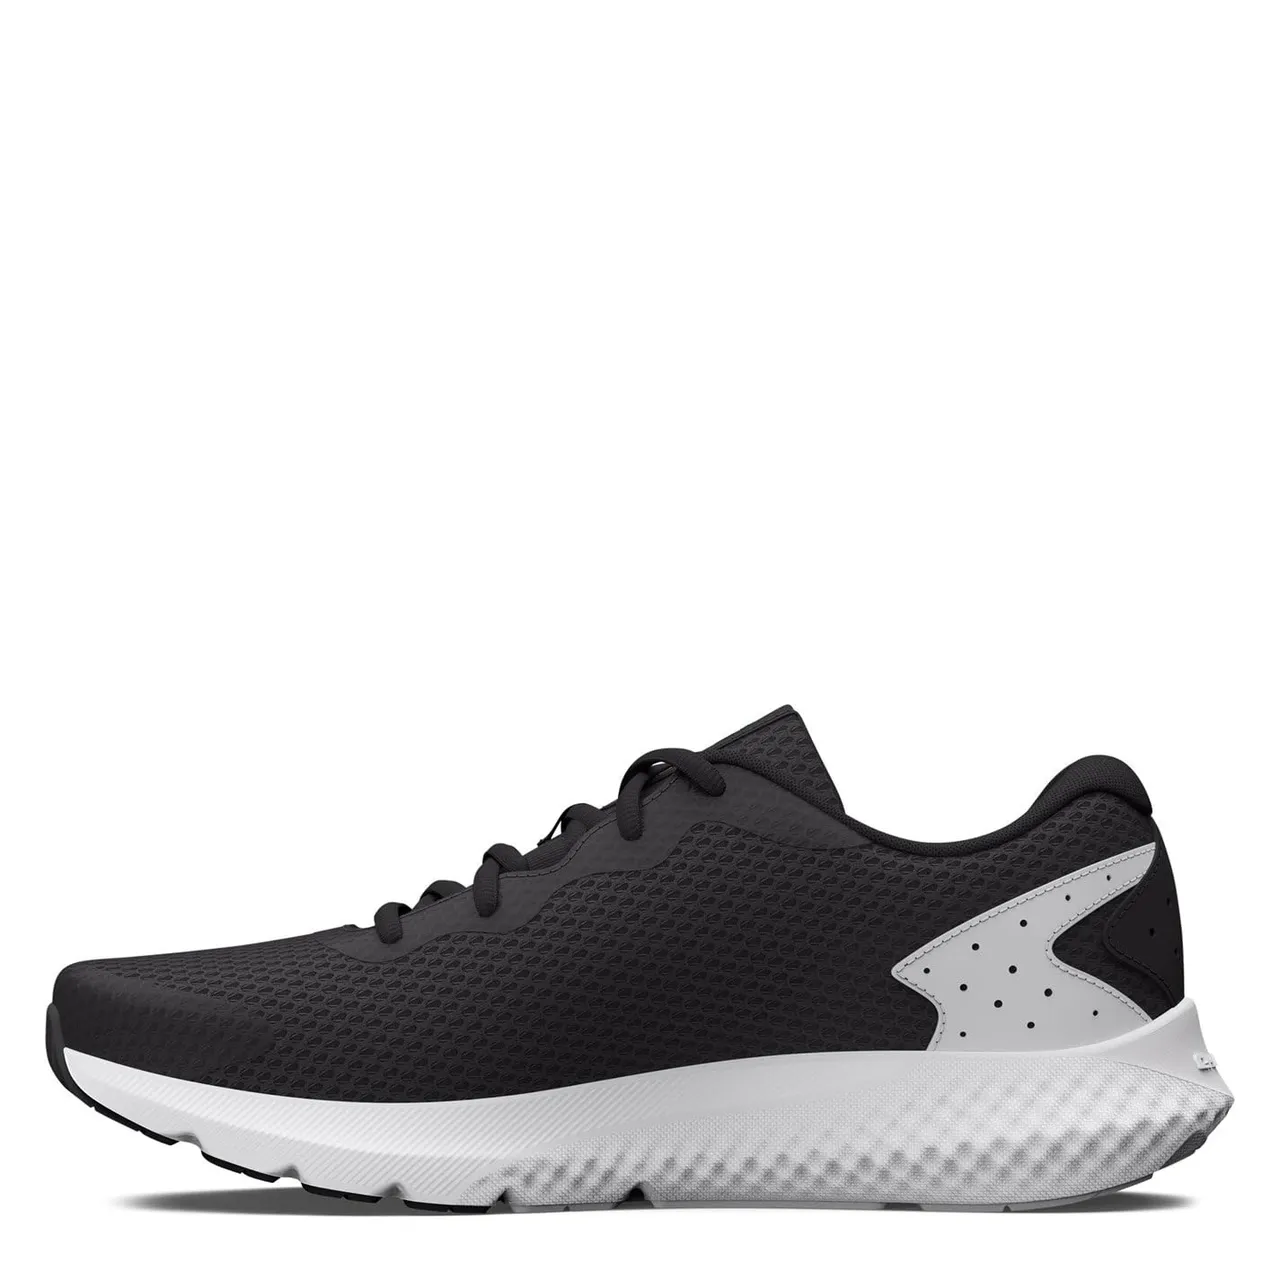 Under Armour Men's UA Charged Rogue 3 Running Shoe